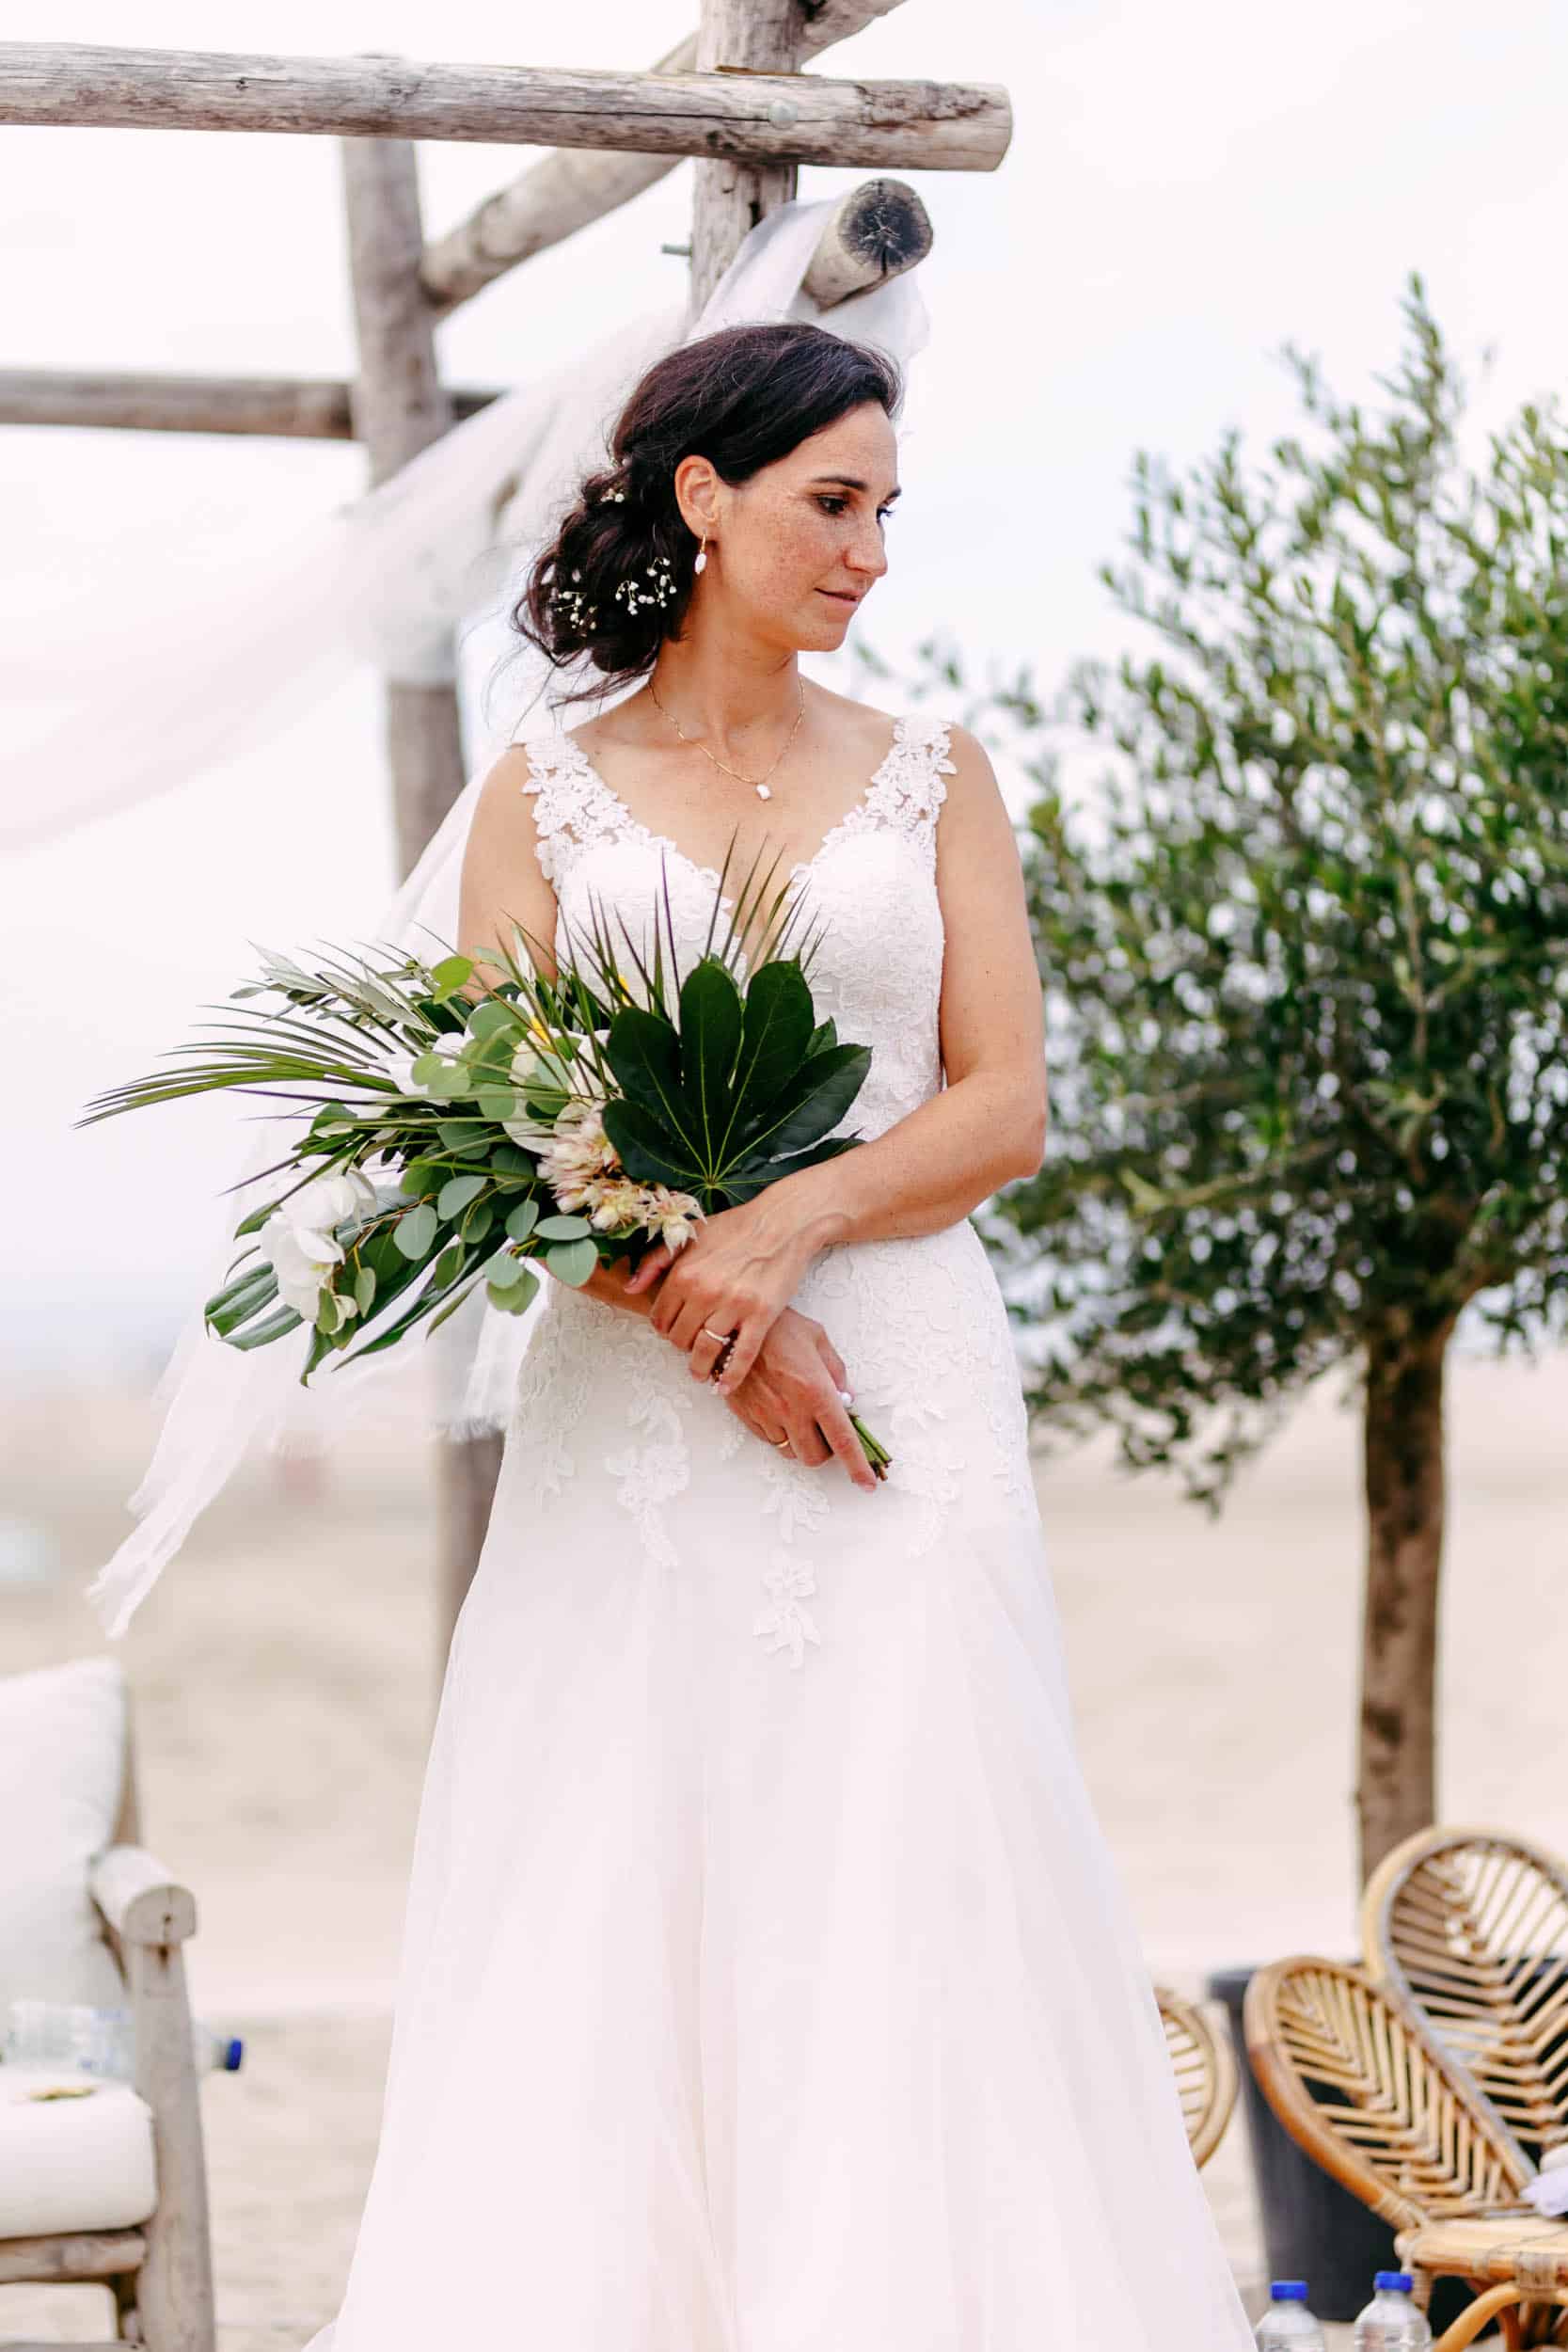 A bride with a wedding bouquet on the beach.